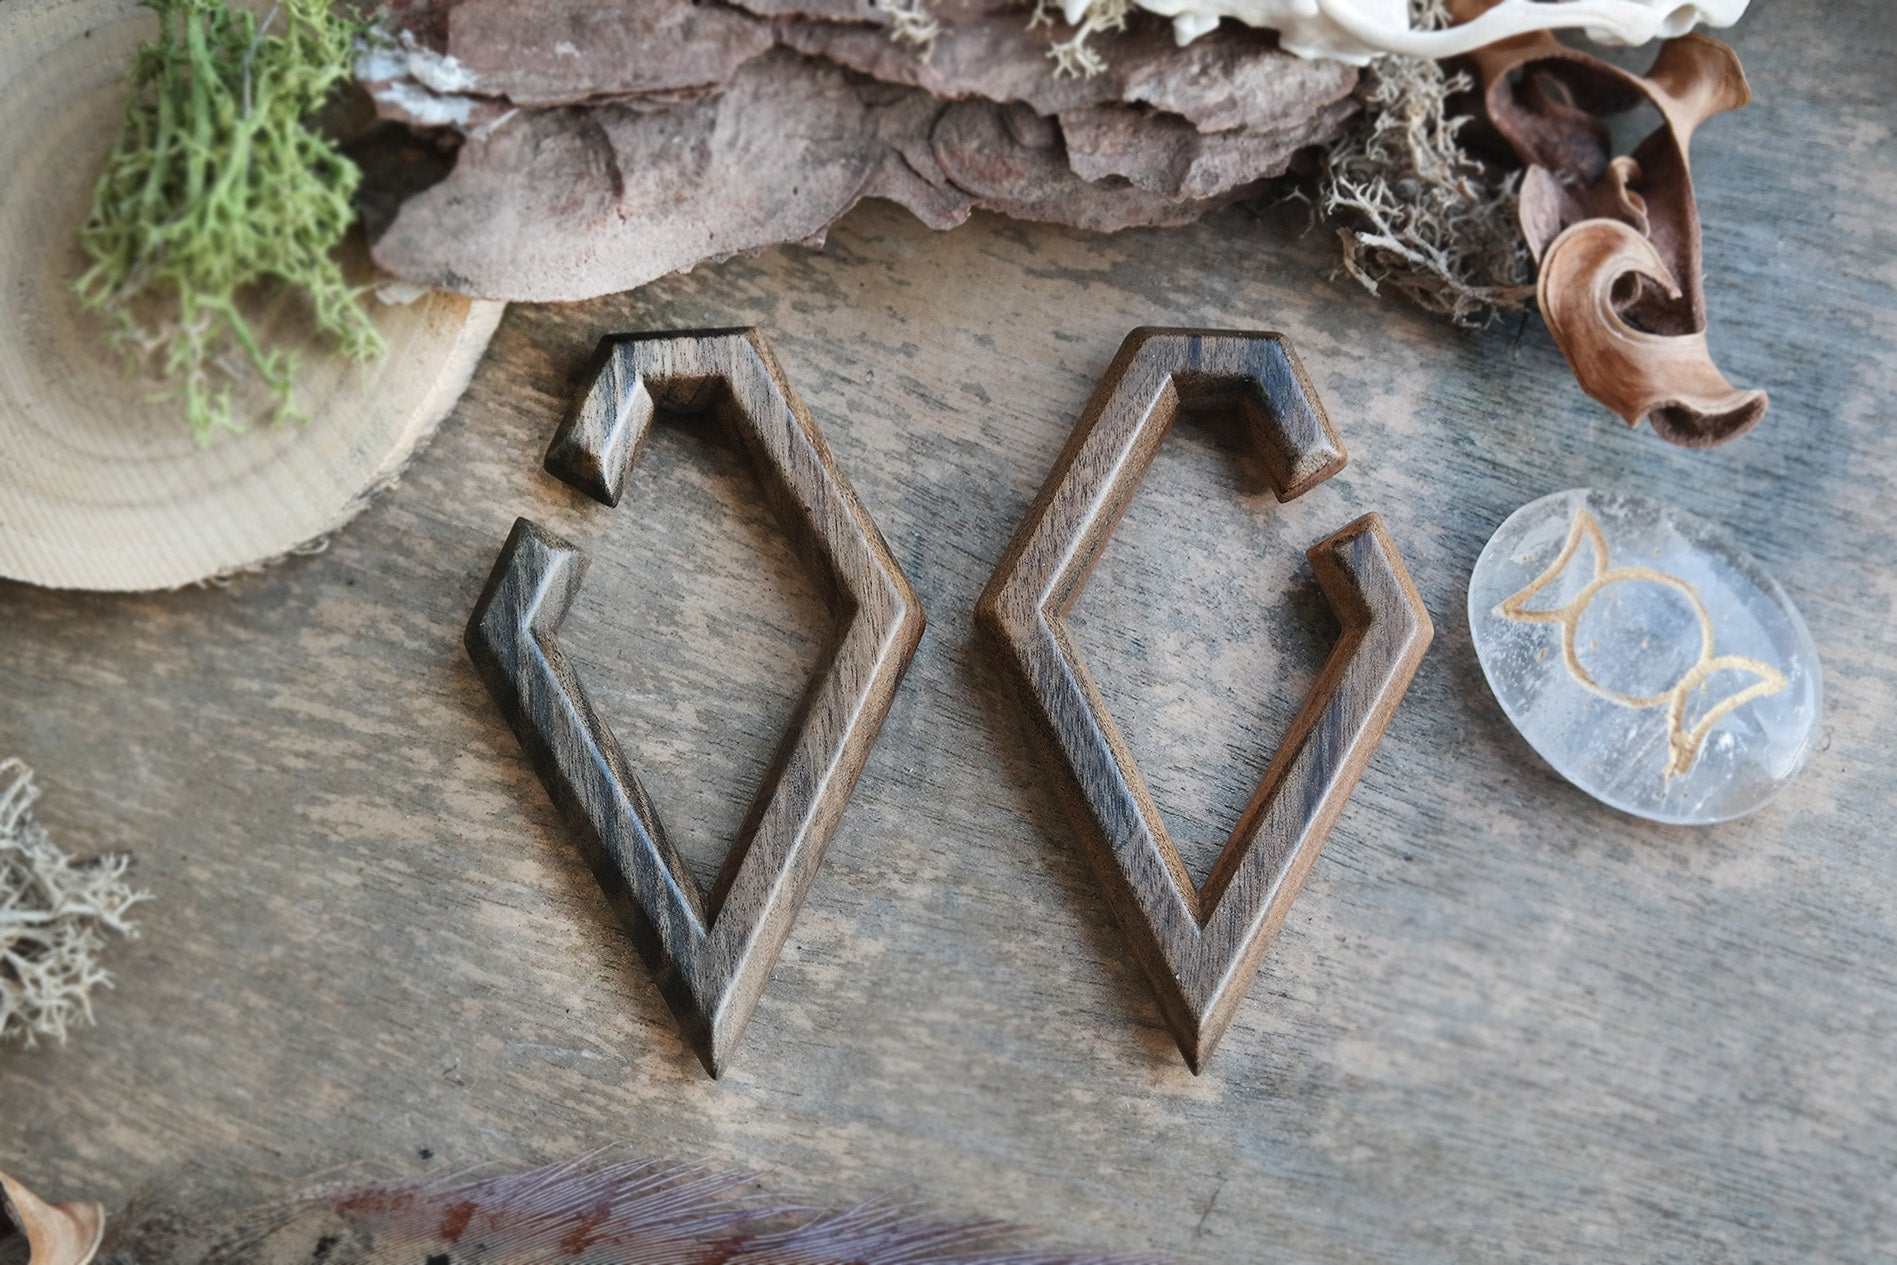 Geometric Wooden Ear Weights #WH06 - Fux Jewellery